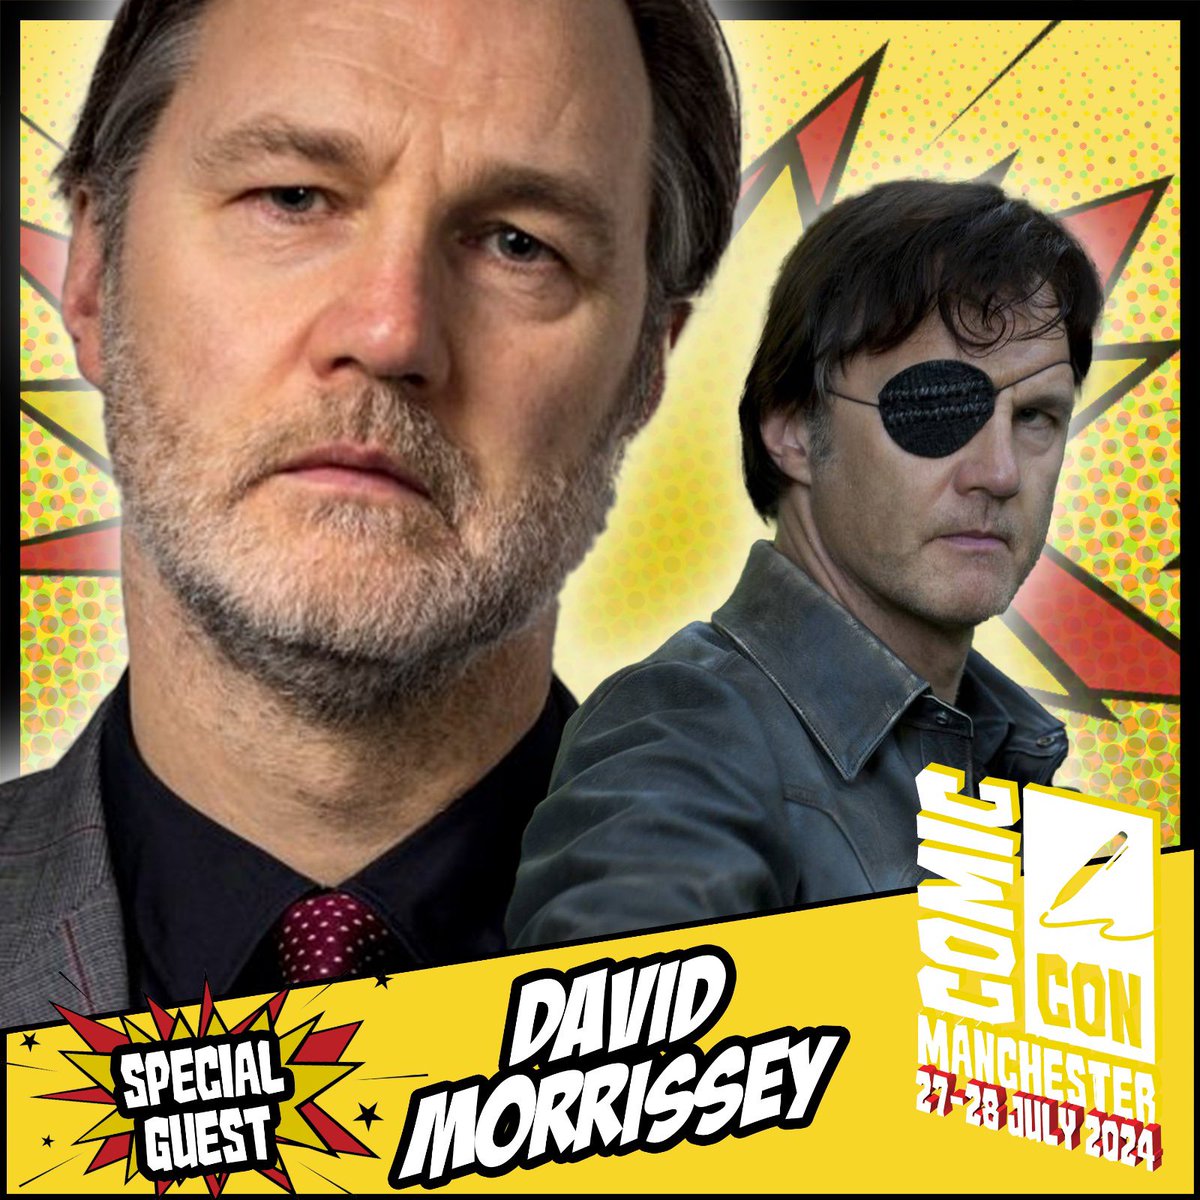 Comic Con Manchester welcomes David Morrissey, known for projects such as The Walking Dead, The Long Shadow, Radioman and many more. Appearing 27-28 July! Tickets: comicconventionmanchester.co.uk